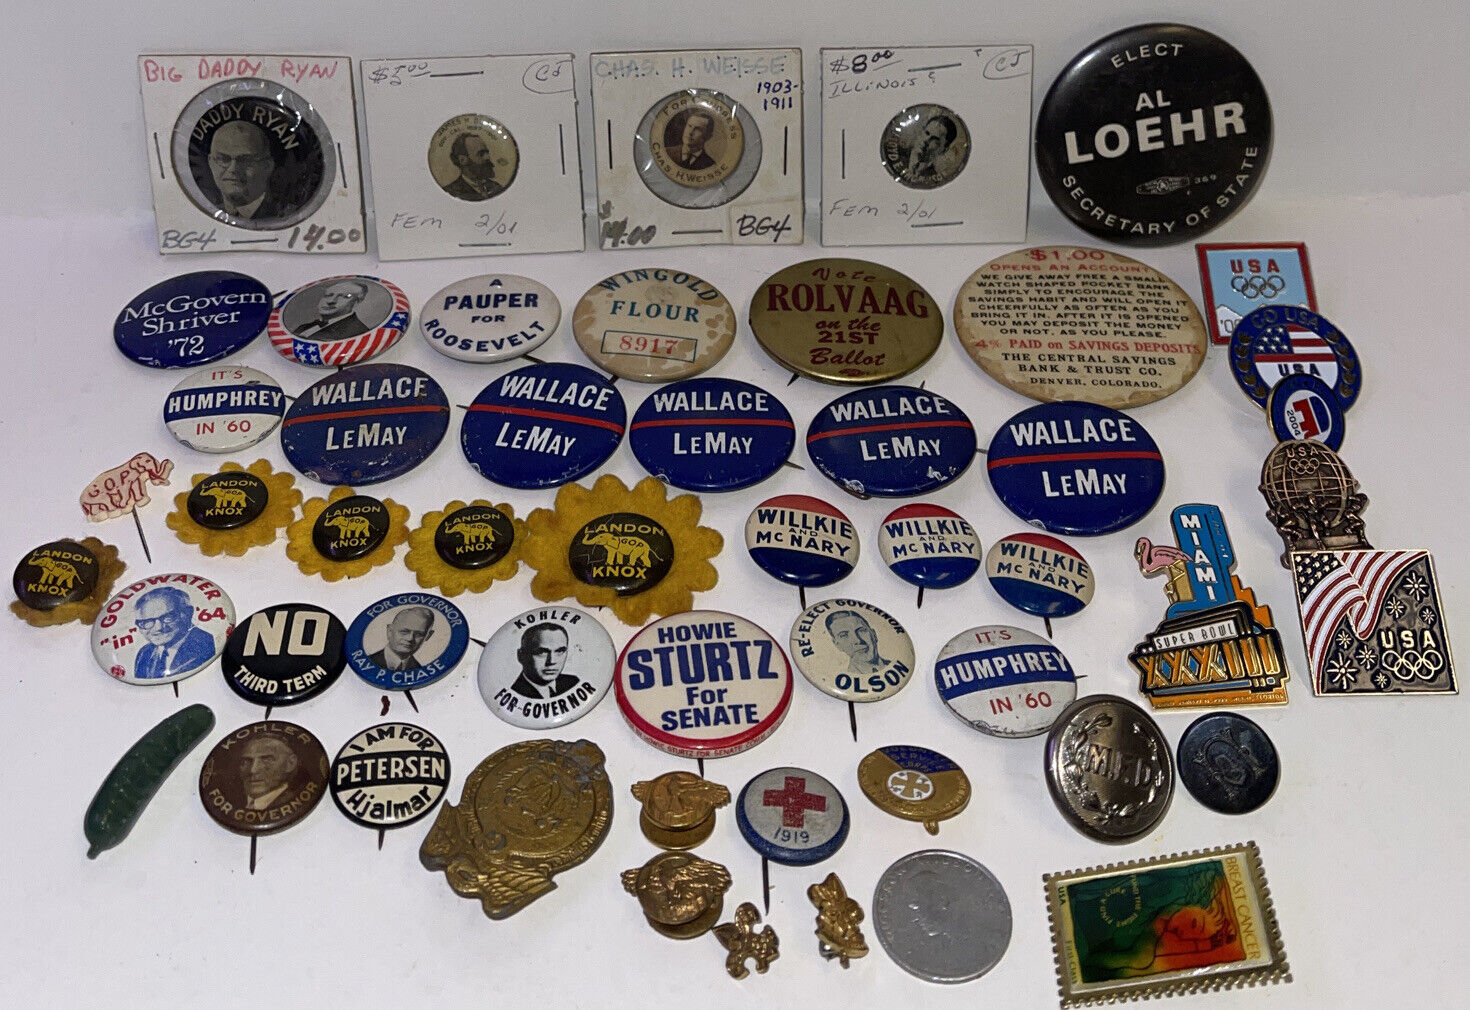 Huge Lot Of 53 Political Pin Backs. Governor, President,Campaign,Military+Button